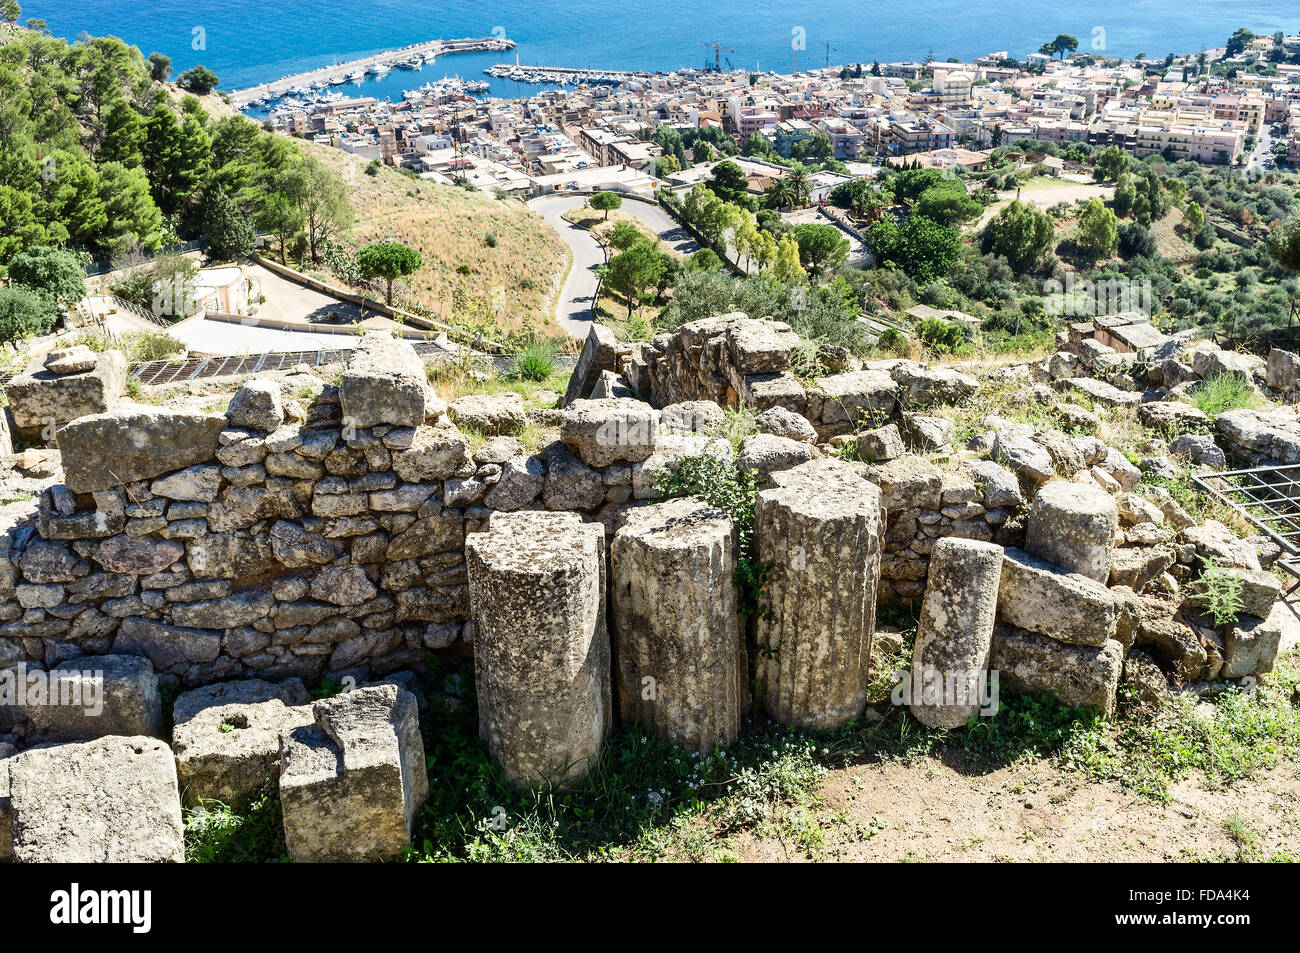 Archaeological Greco-Roman site of Solunto in Sicily, Italy and coastal fishing village Stock Photo